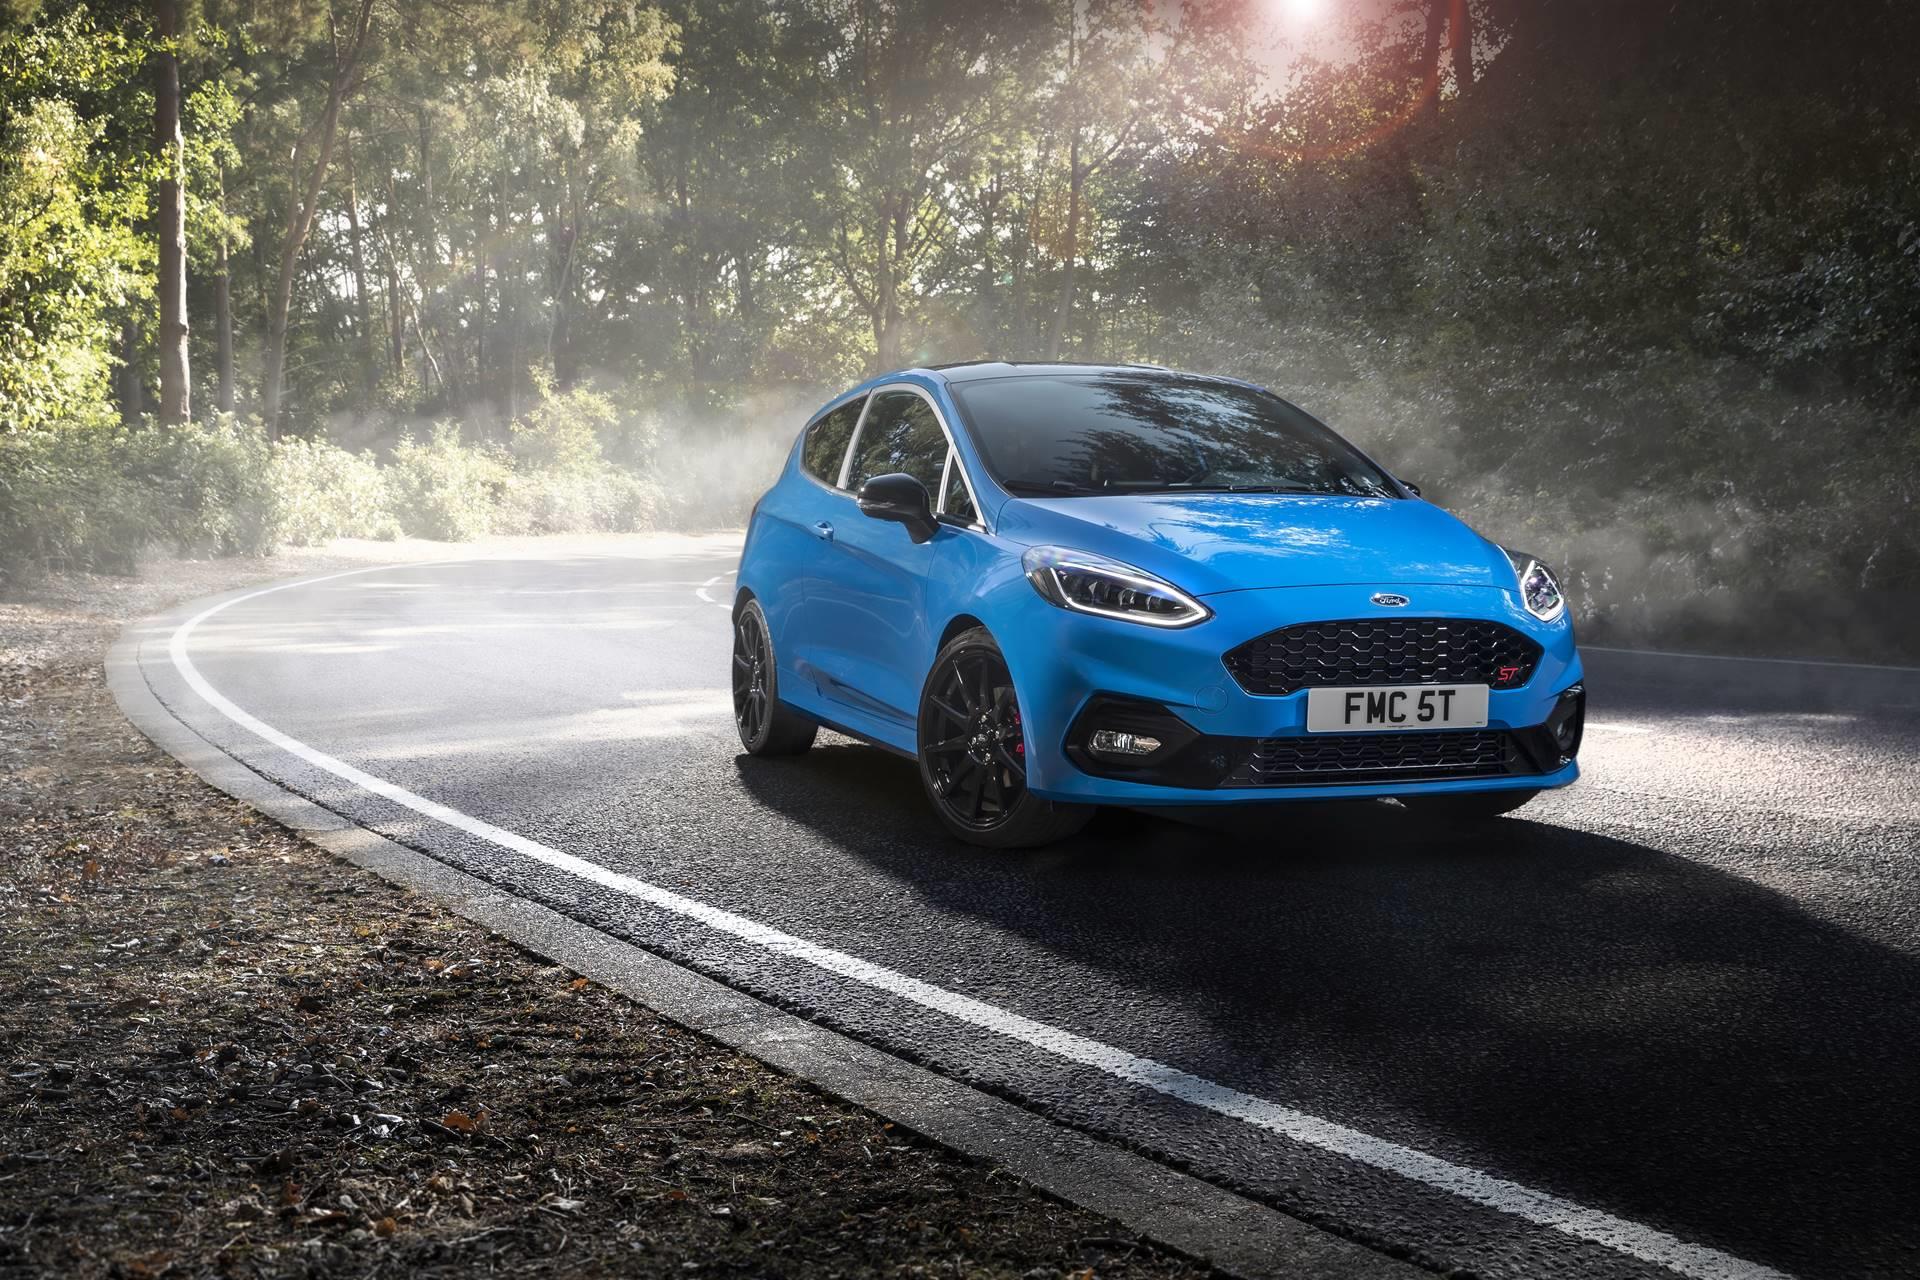 2021 Ford Fiesta St Edition Image Photo 10 Of 30